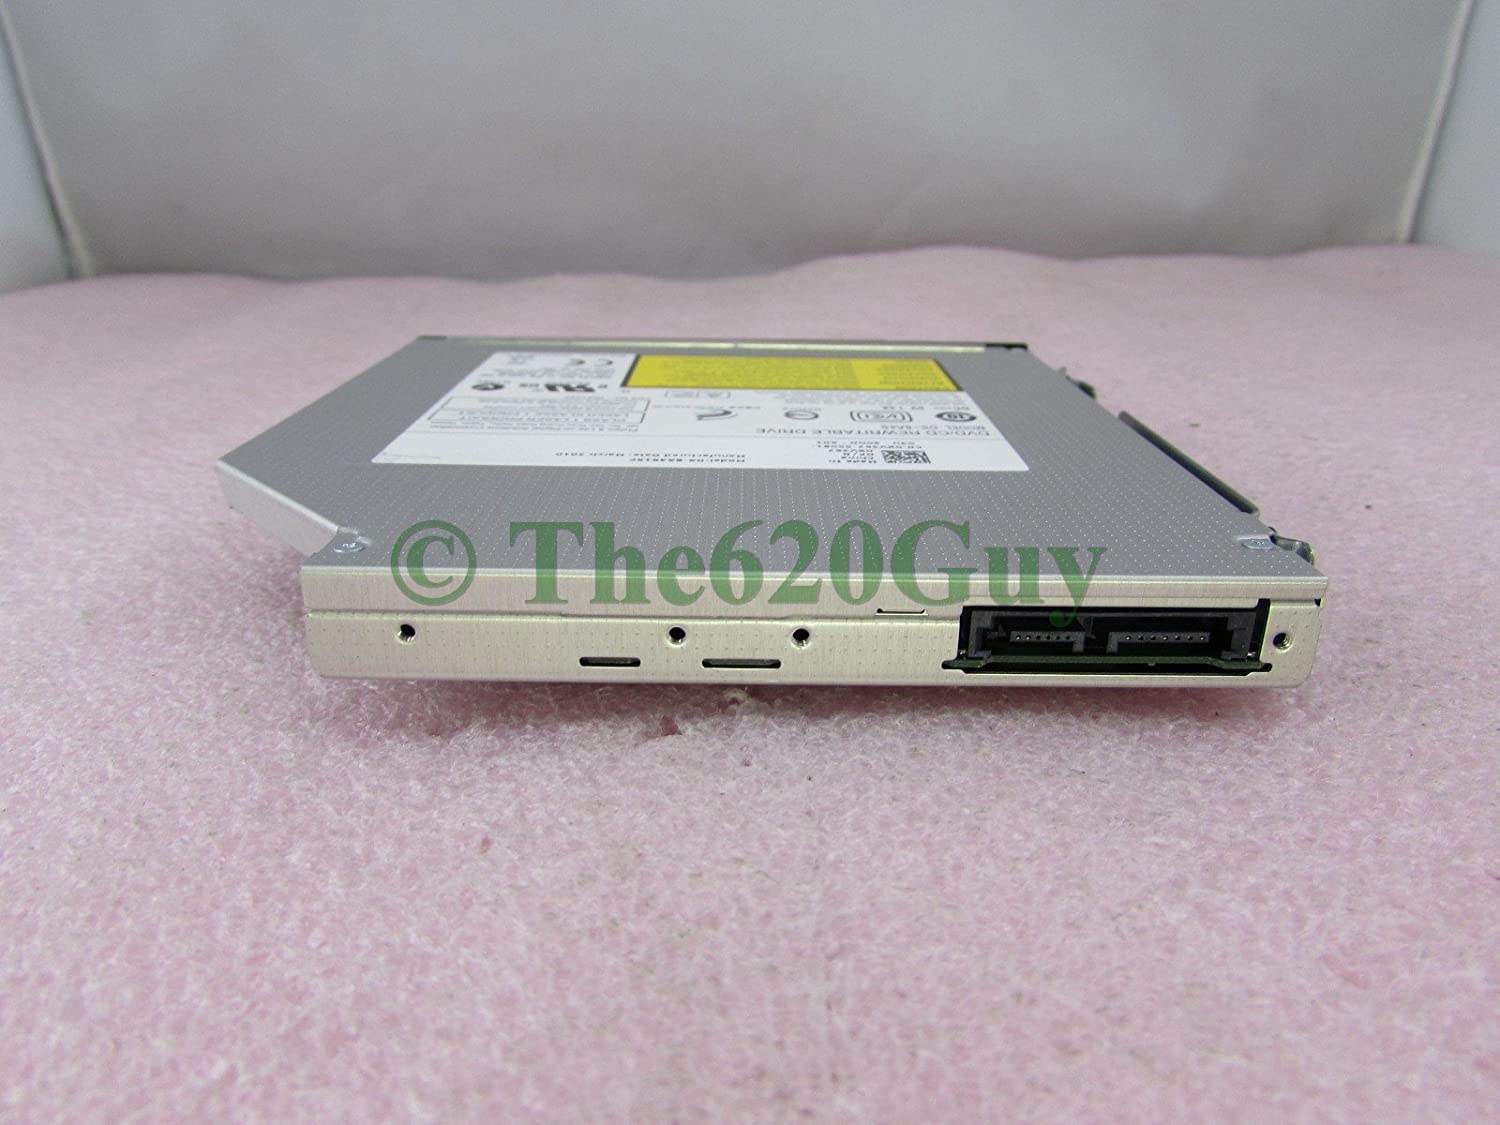 Plds dvd-rw ds8a8sh driver for mac